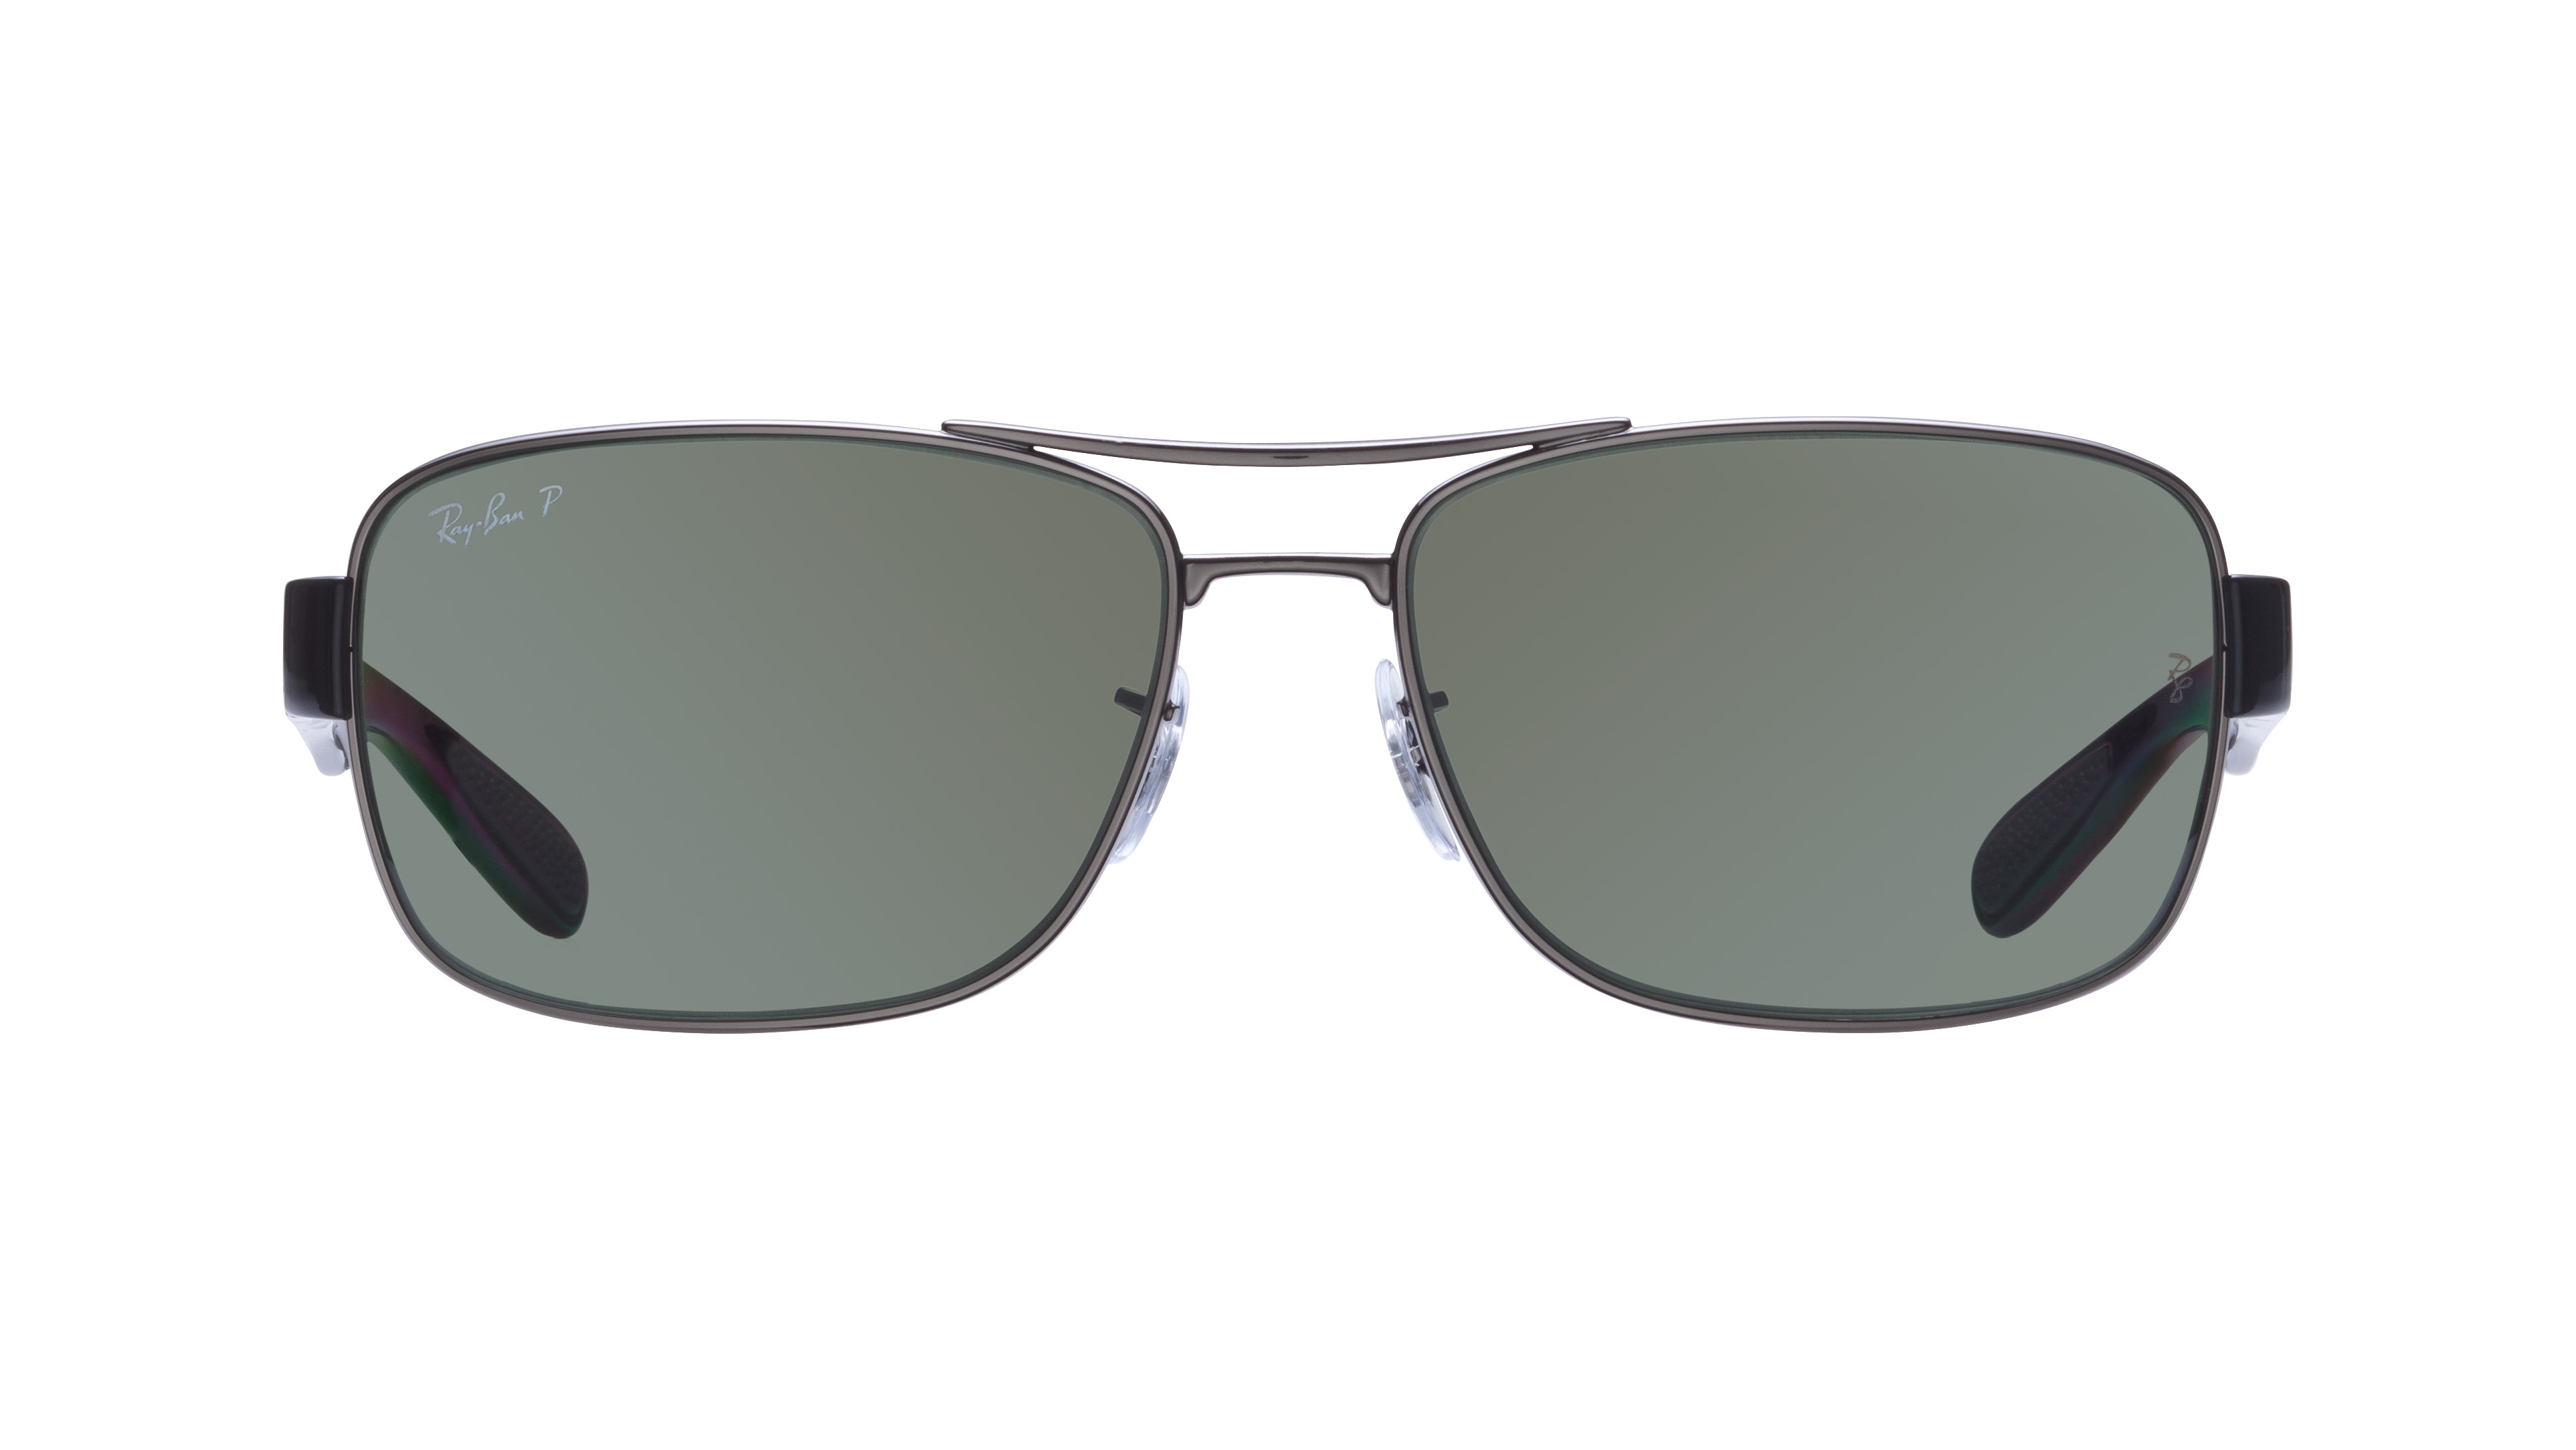 [products.image.front] Ray-Ban 0RB3522 004/9A Sonnenbrille